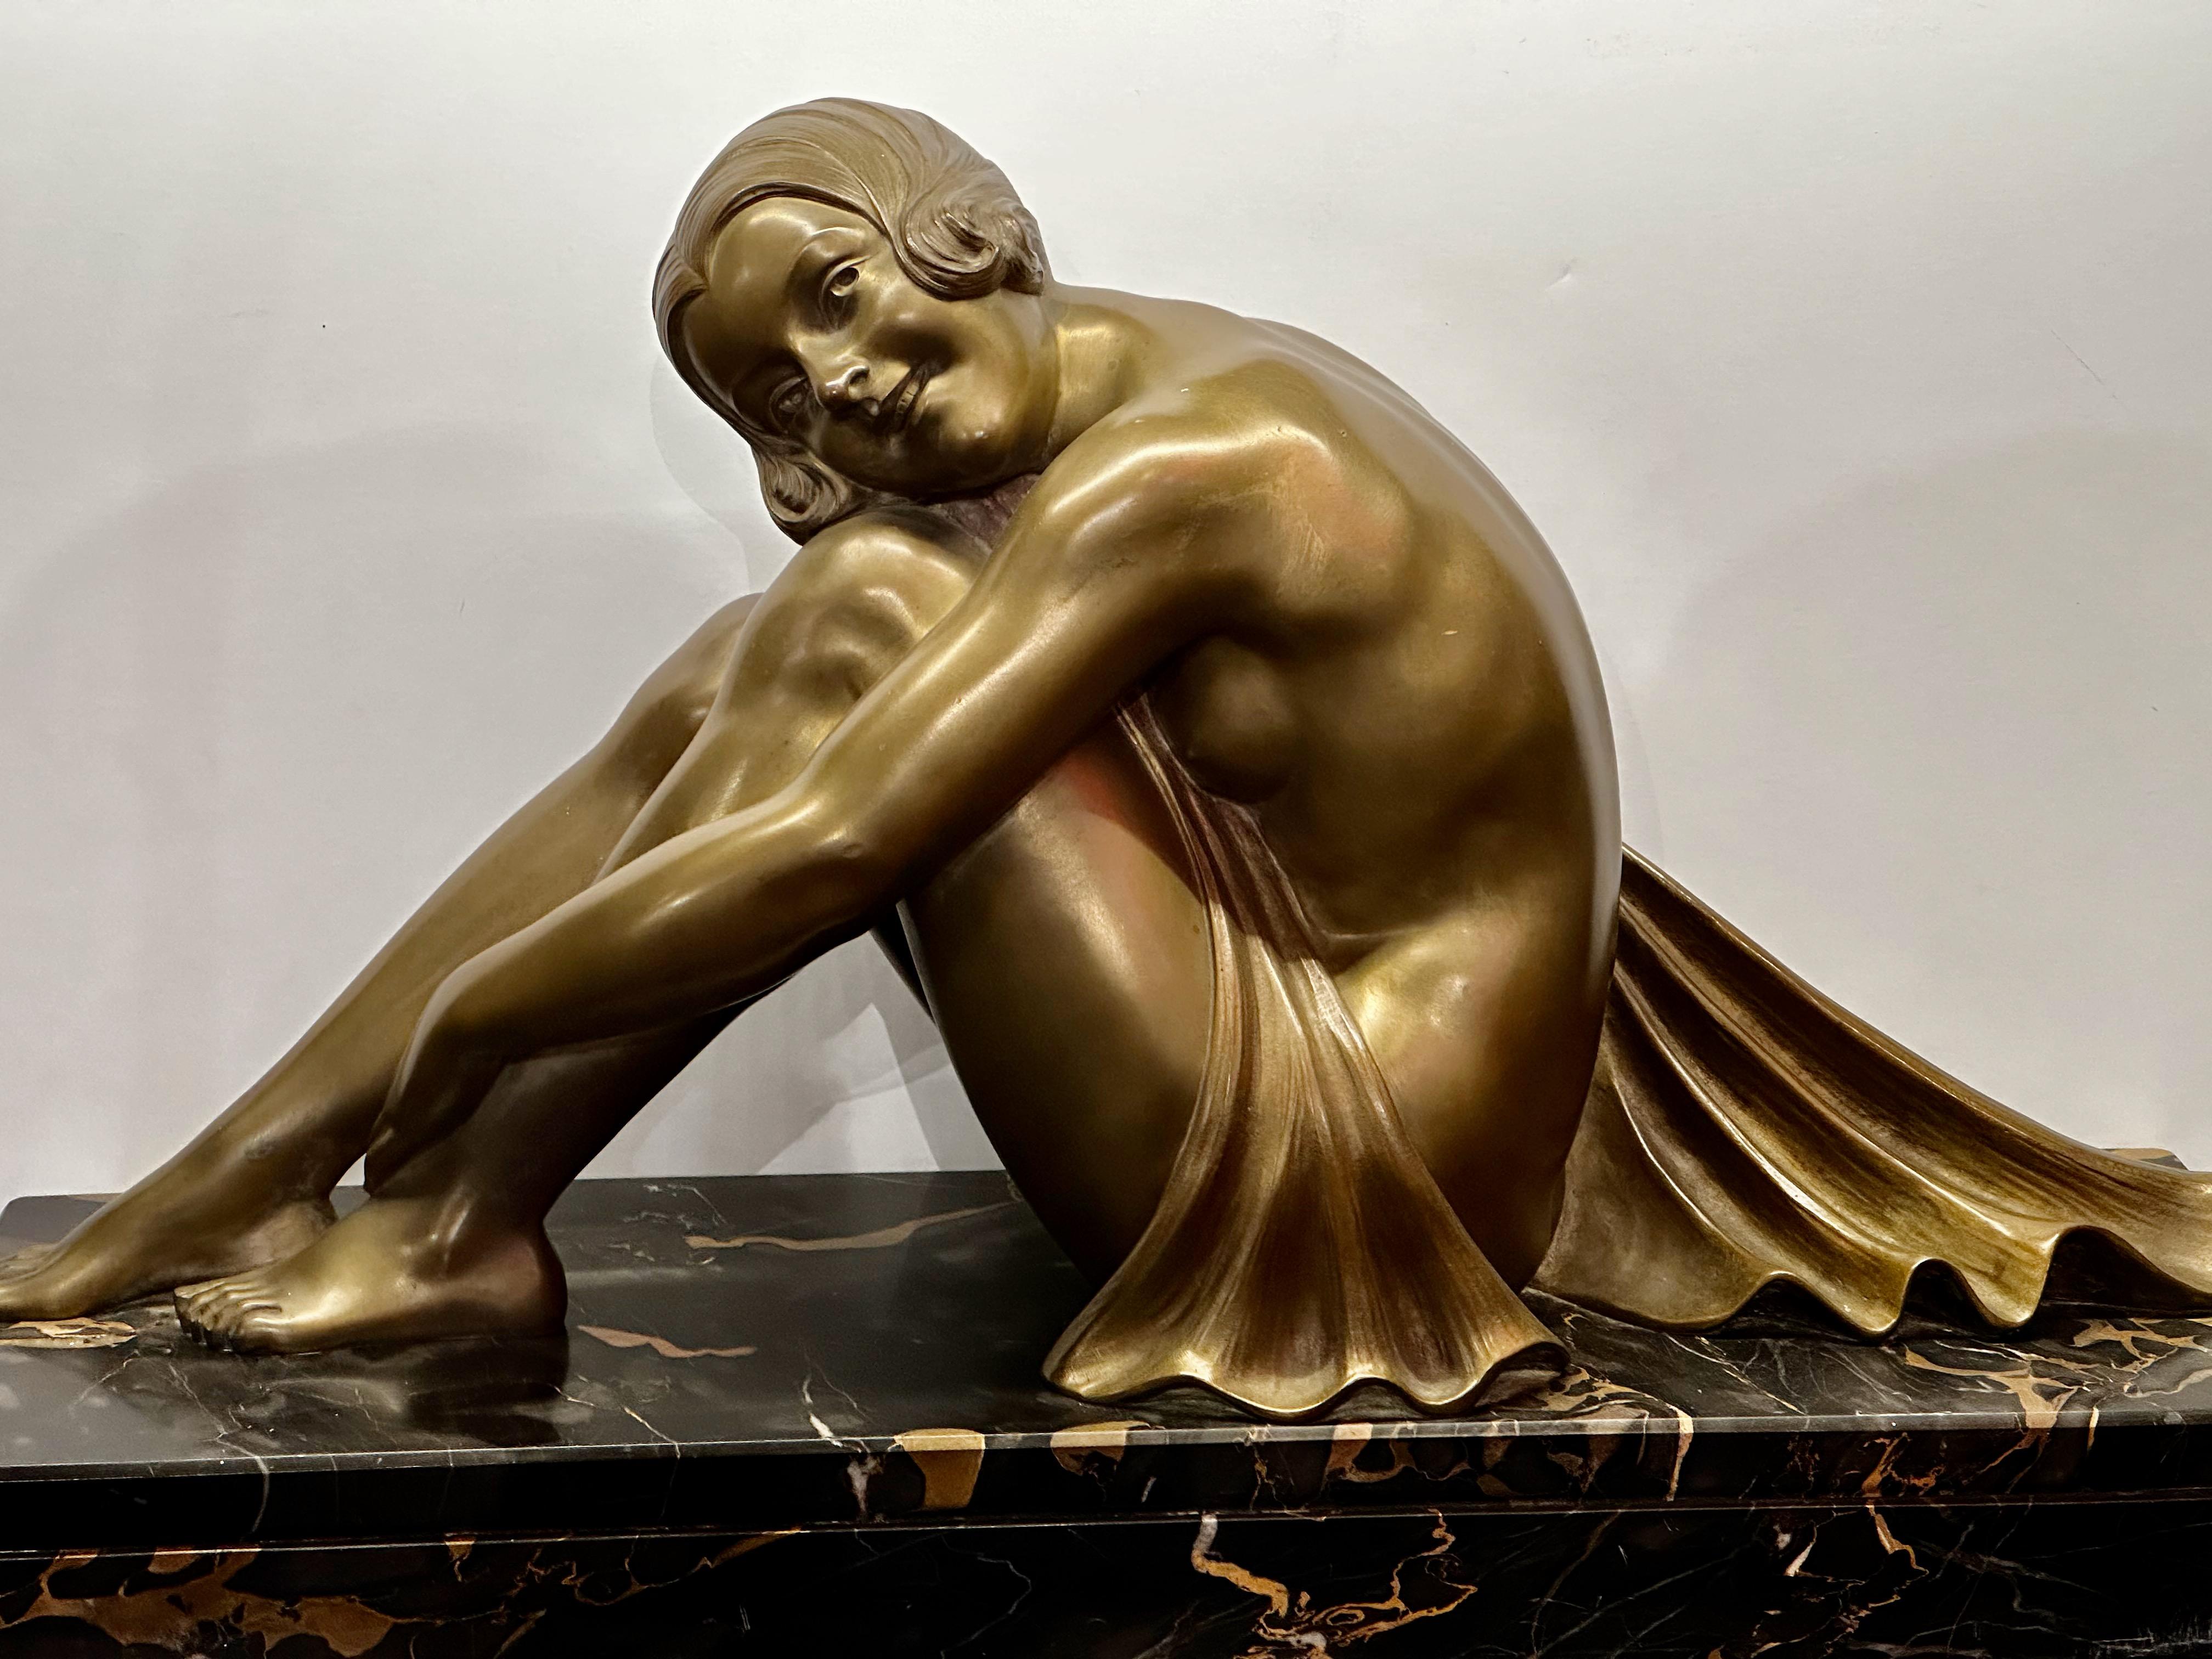 An Art Deco Bronze Statue by Armand Godard, produced by the Parisian foundry of Edmond Etling. This is an example of a high style rendered in the highest quality. Nothing is more emblematic of the Art Deco Era than a sculpture of a sleek, nude